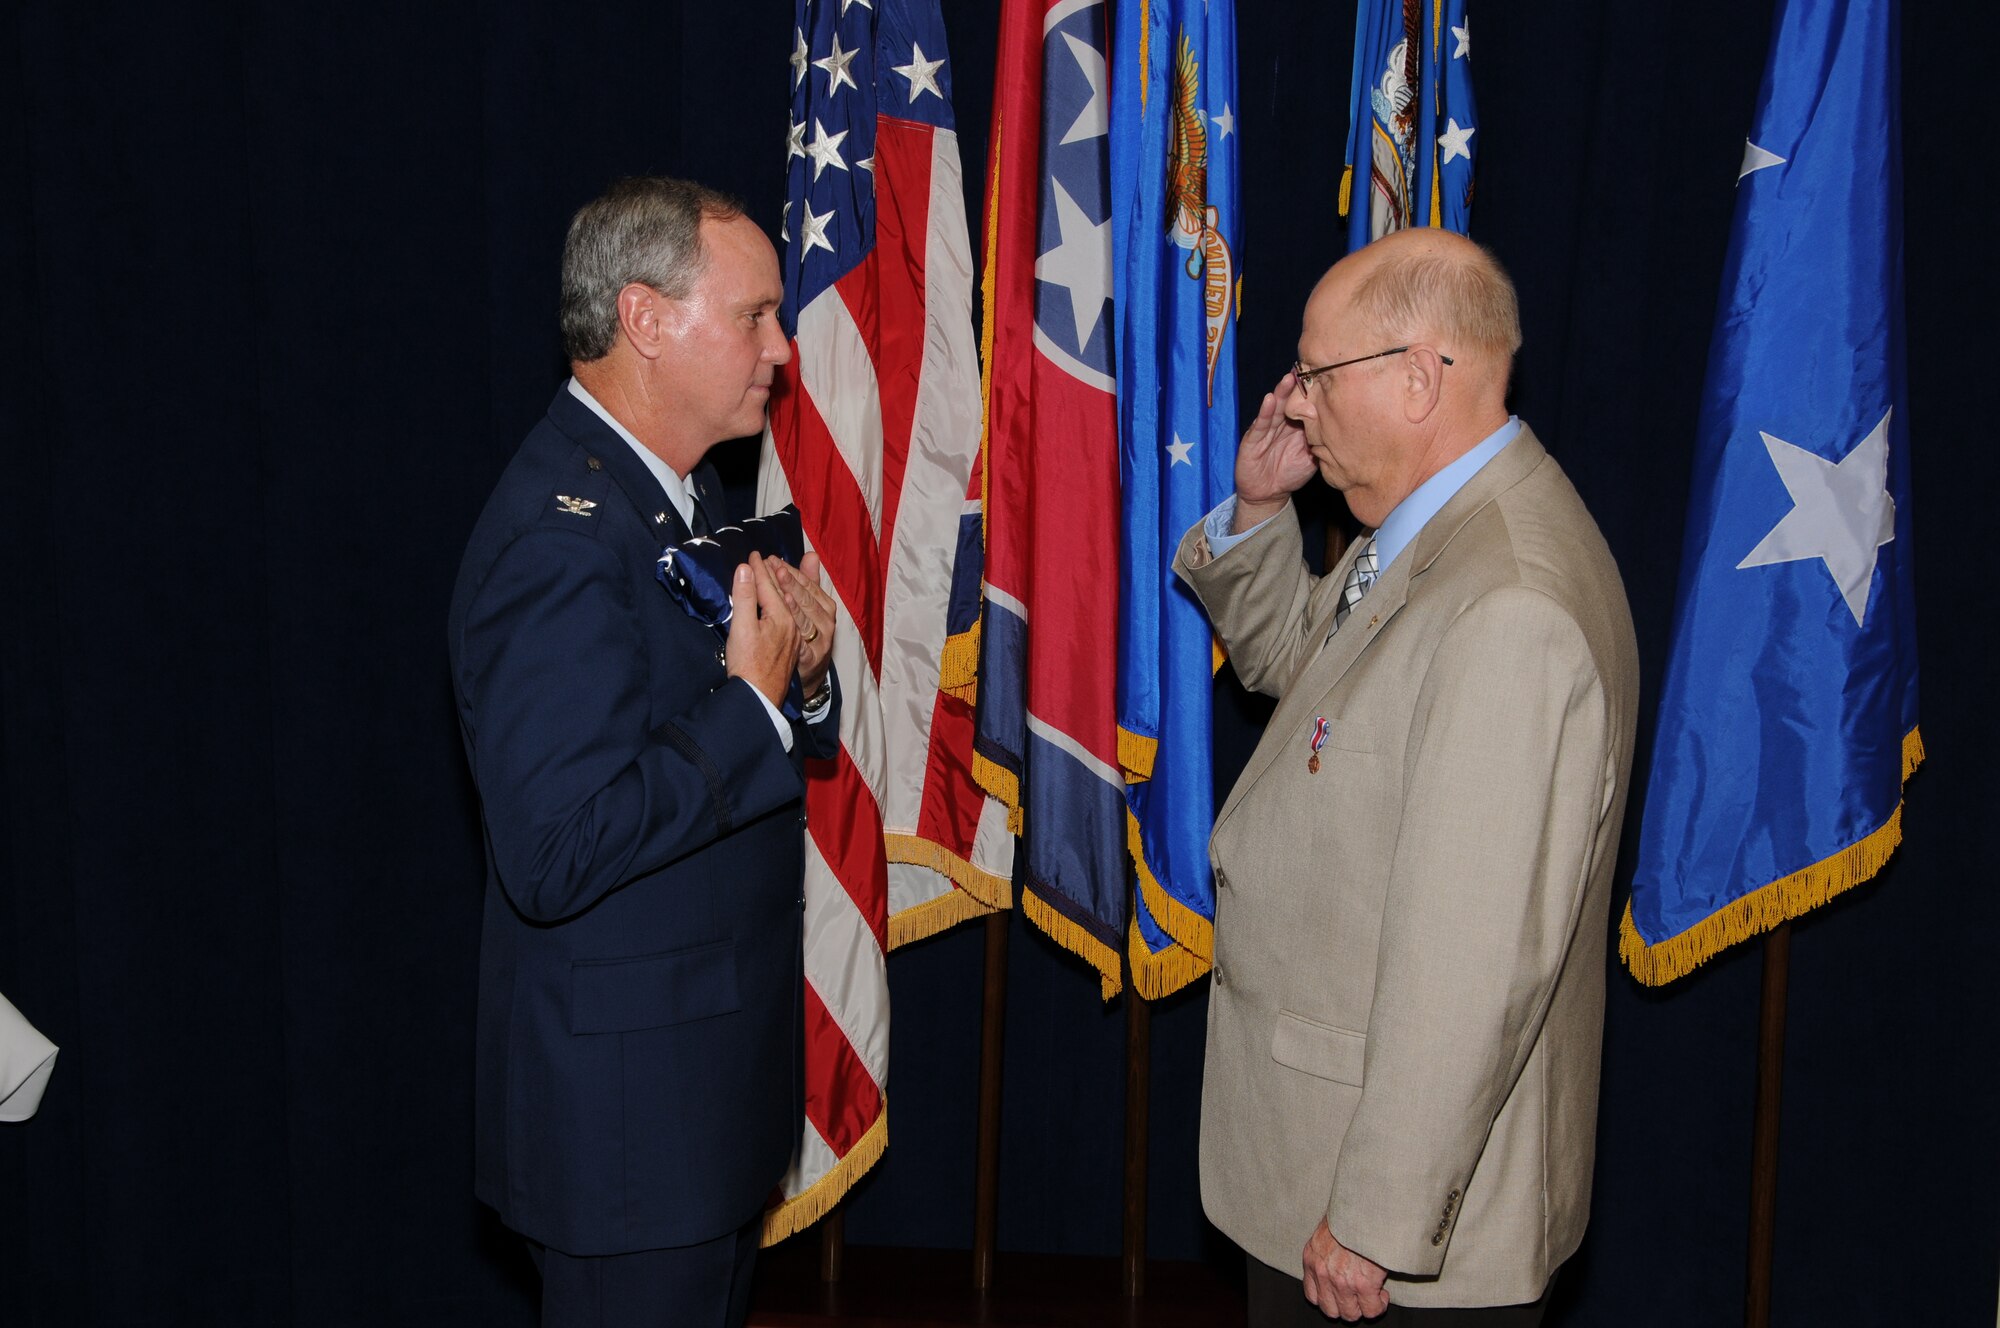 Colonel Harry D. Montgomery, 164th Airlift Wing Commander, presents the American Flag that was flown on Colonel Spencer's last duty day to Lieutenant Colonel Lamar Spencer during Col Spencer's retirement ceremony.